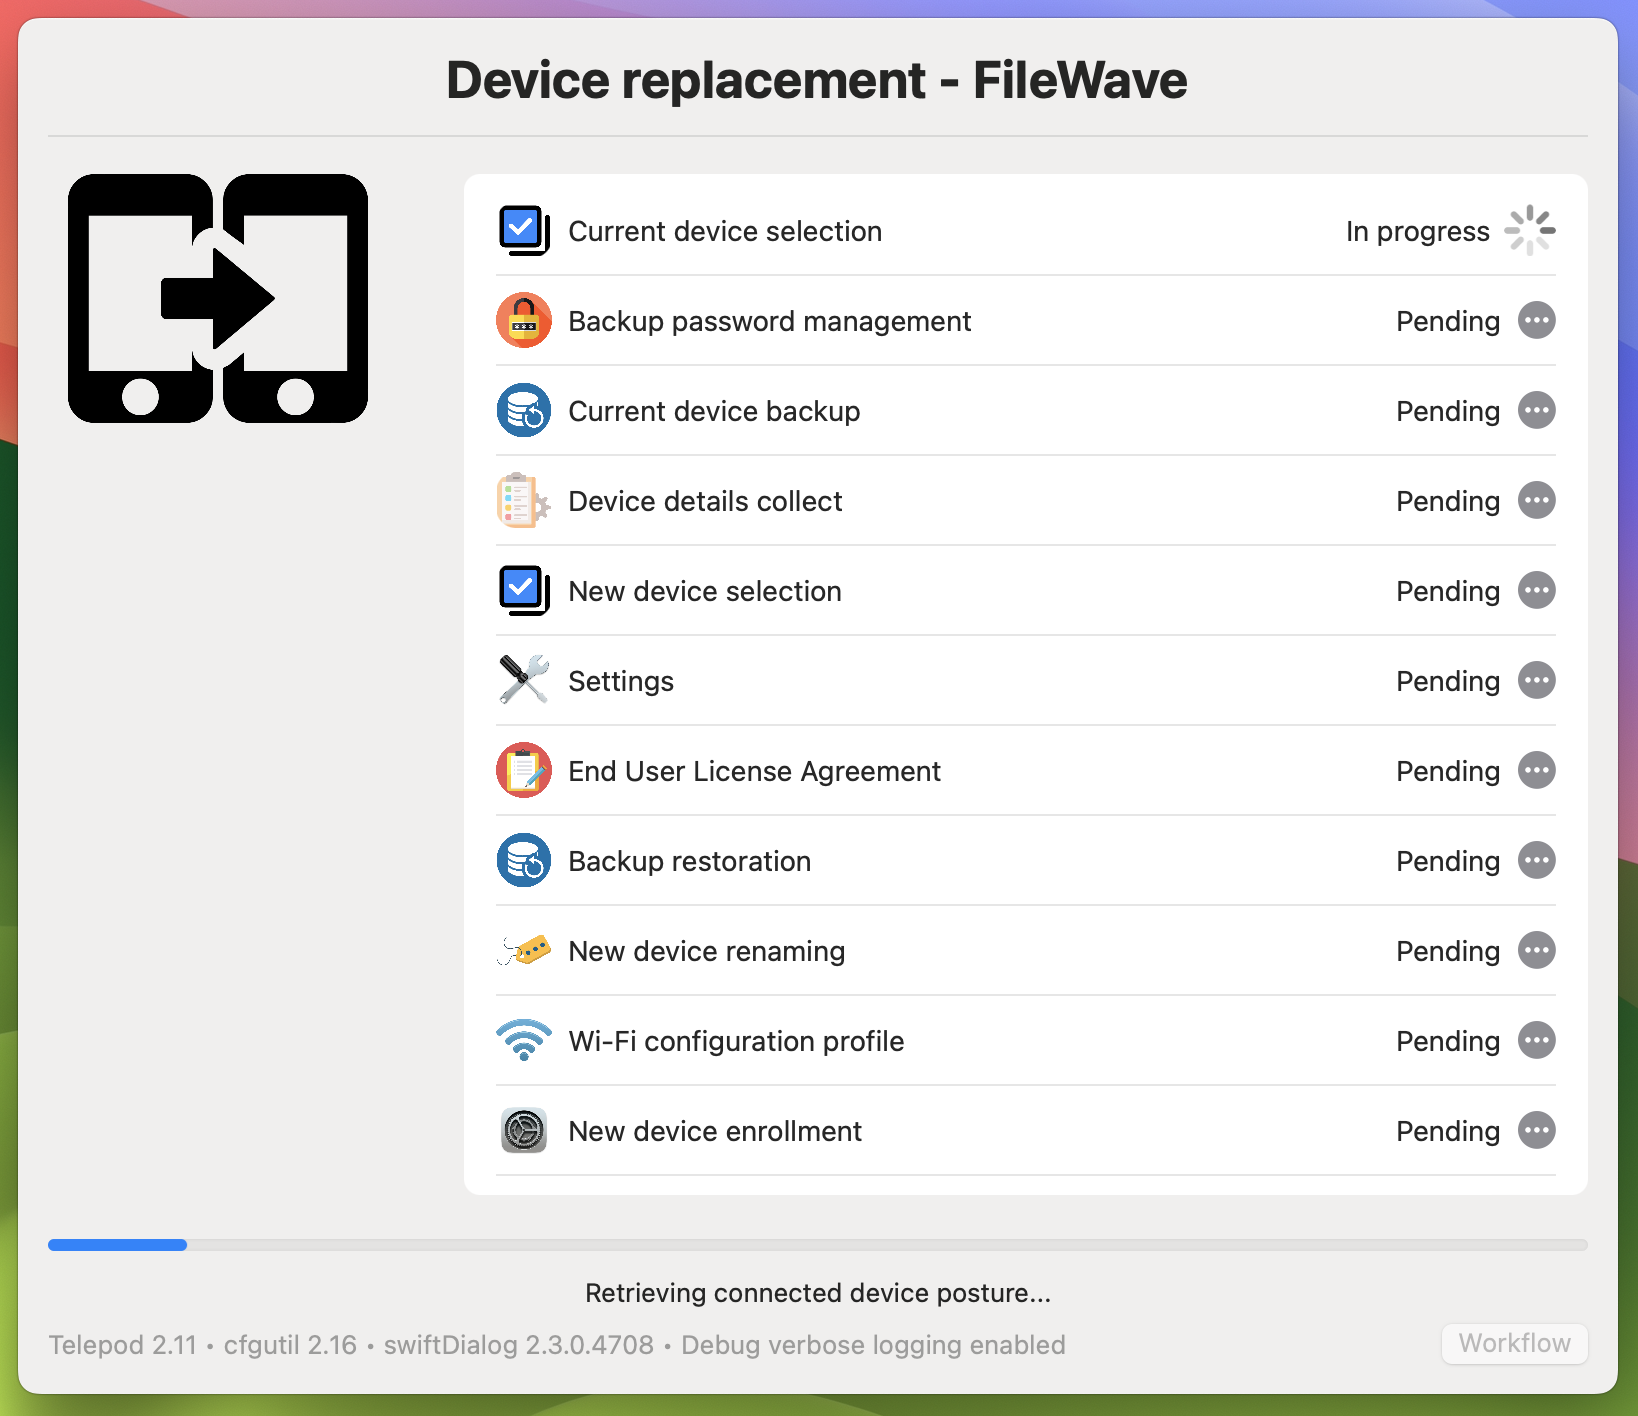 telepod_2_replacement_filewave_004_Workflow started.png